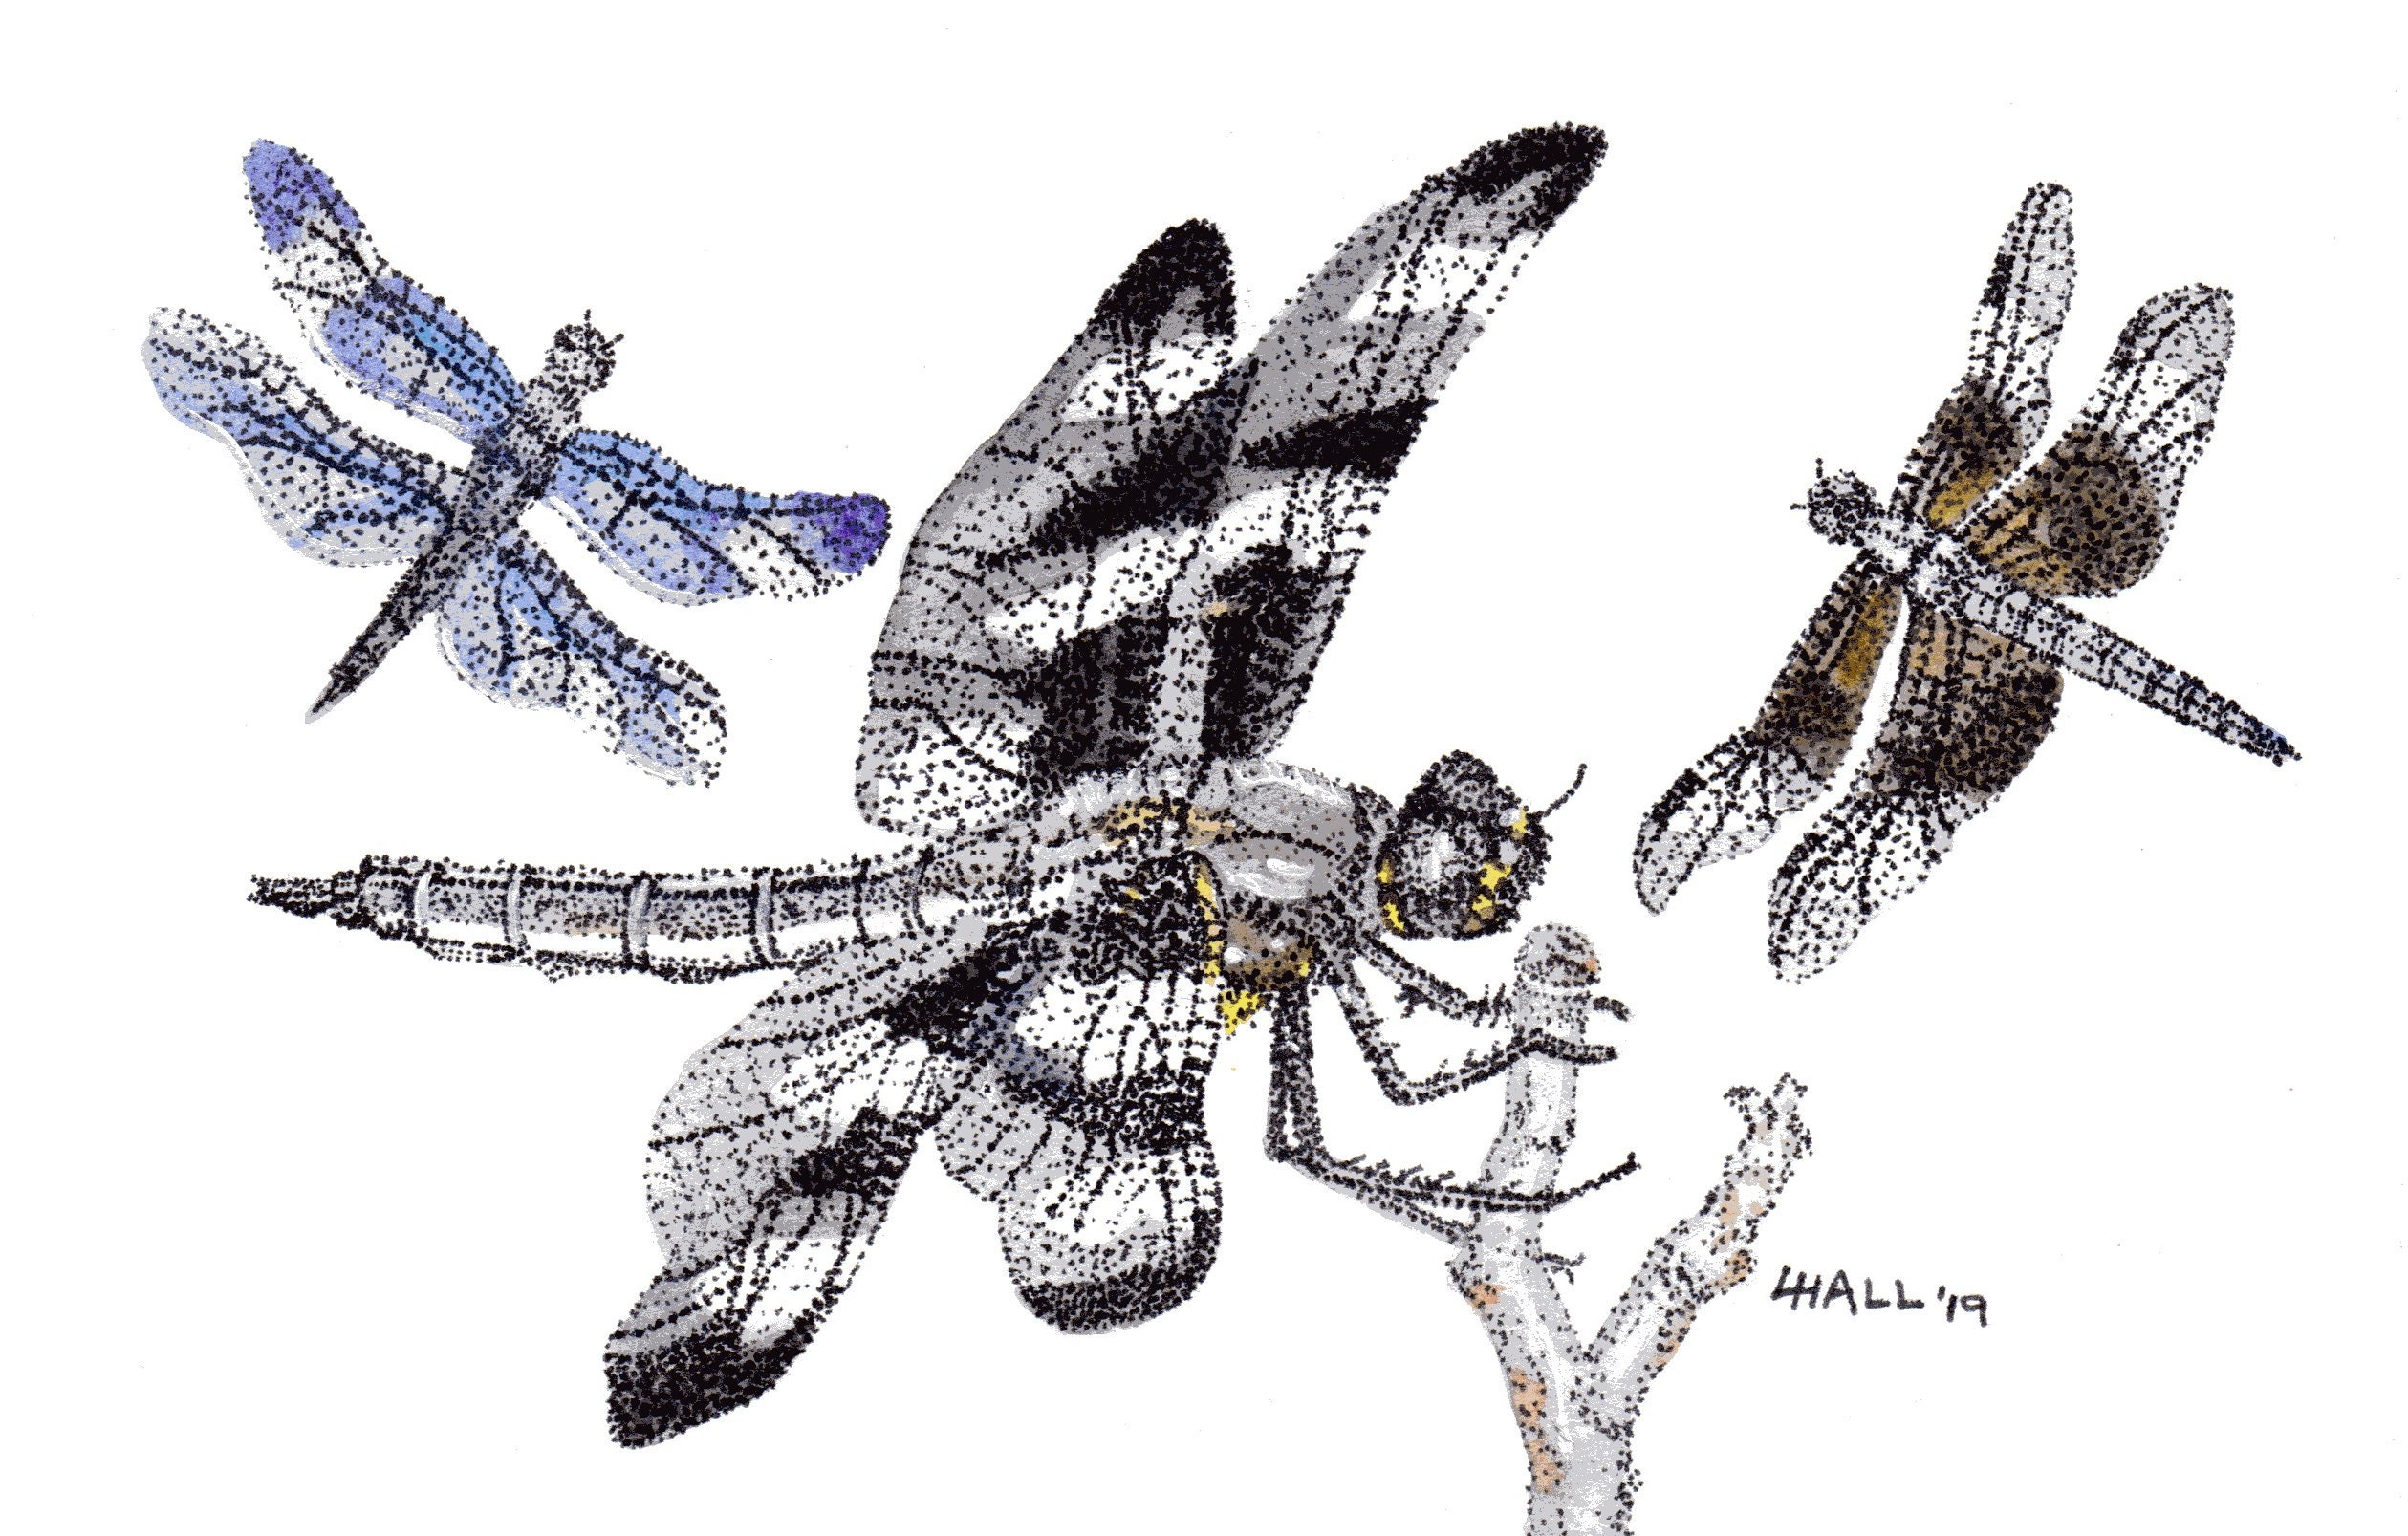 Drawing a Dragonfly - Stippling with Pen and Ink